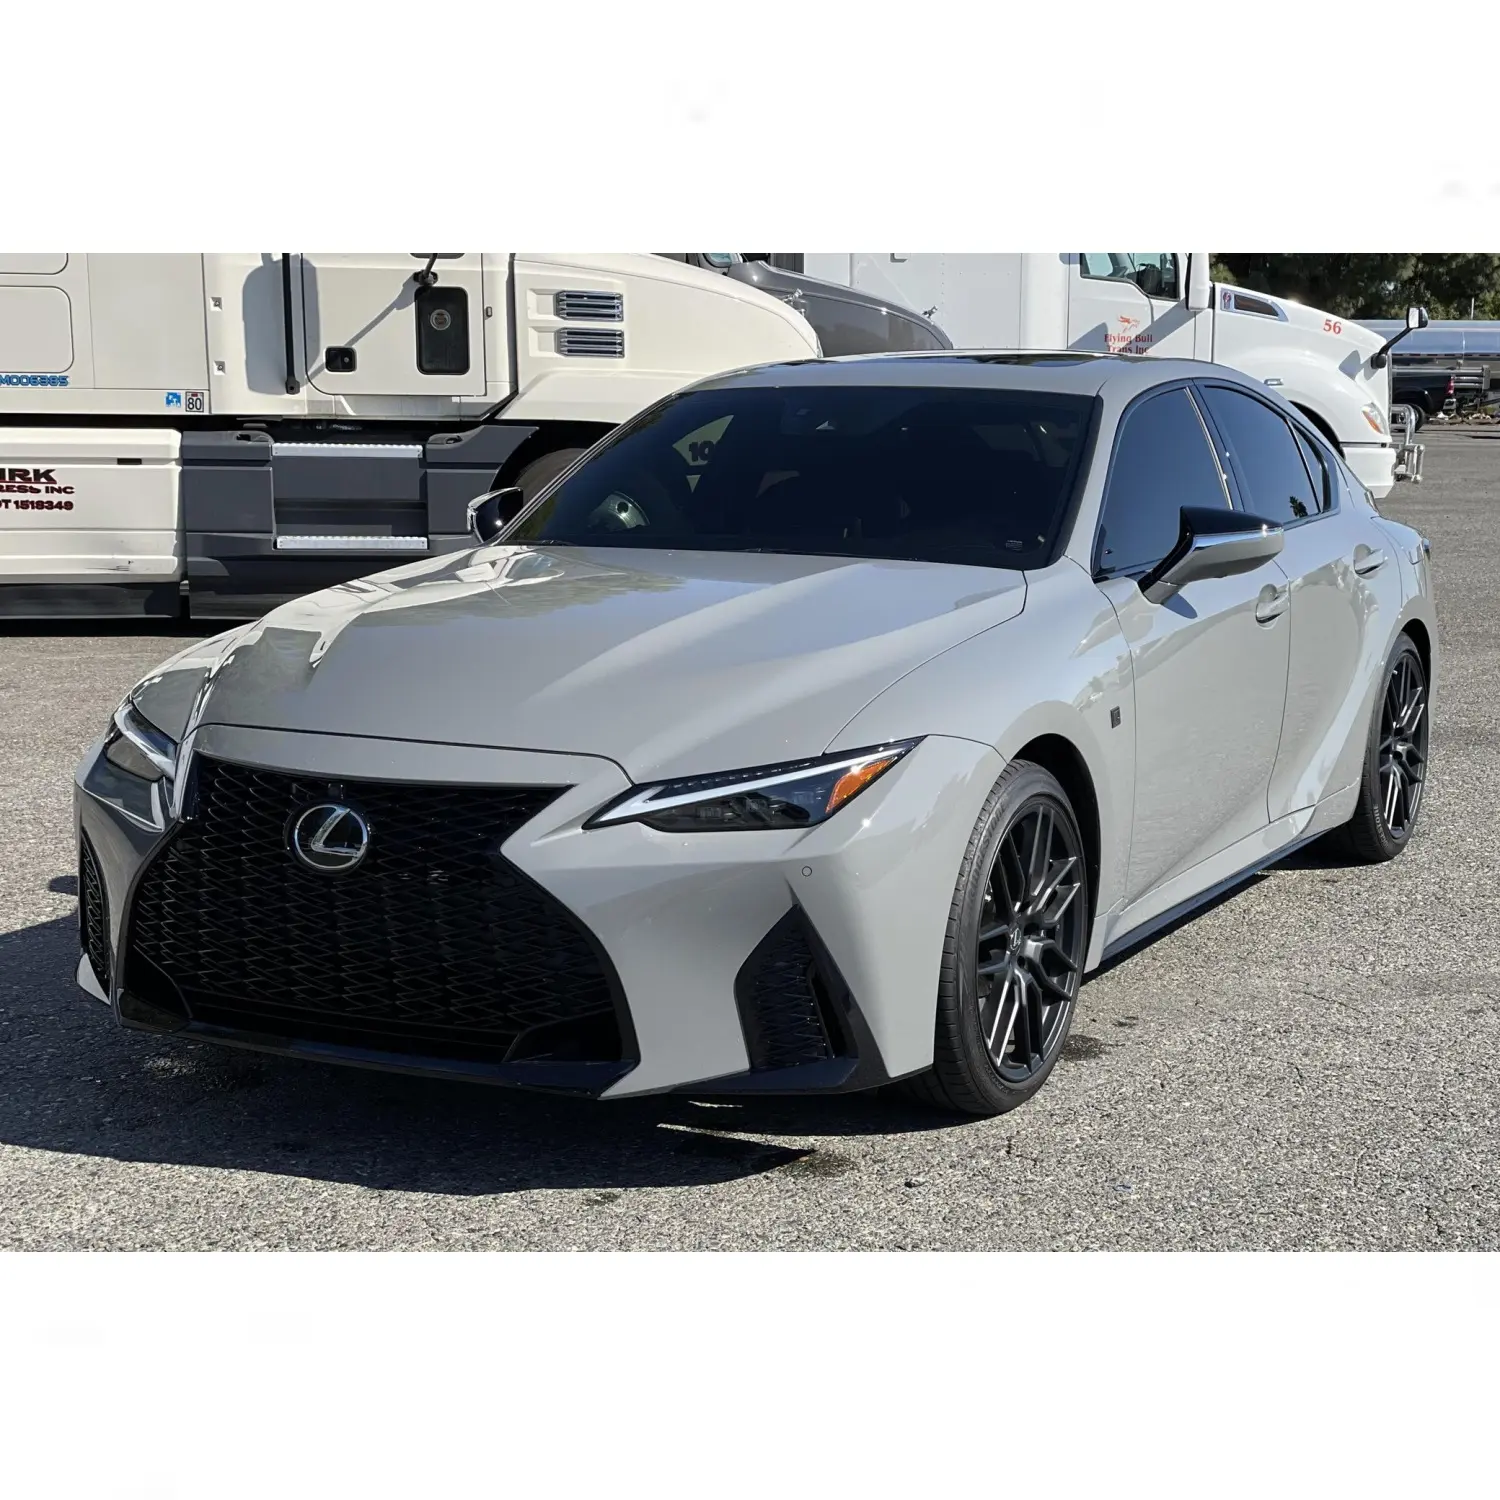 FAIRLY USED 2022 Lex us IS 500 F-Sport Car 472-hp Naturally-Aspirated V8, Launch Edition rhd lhd vehicle for sale